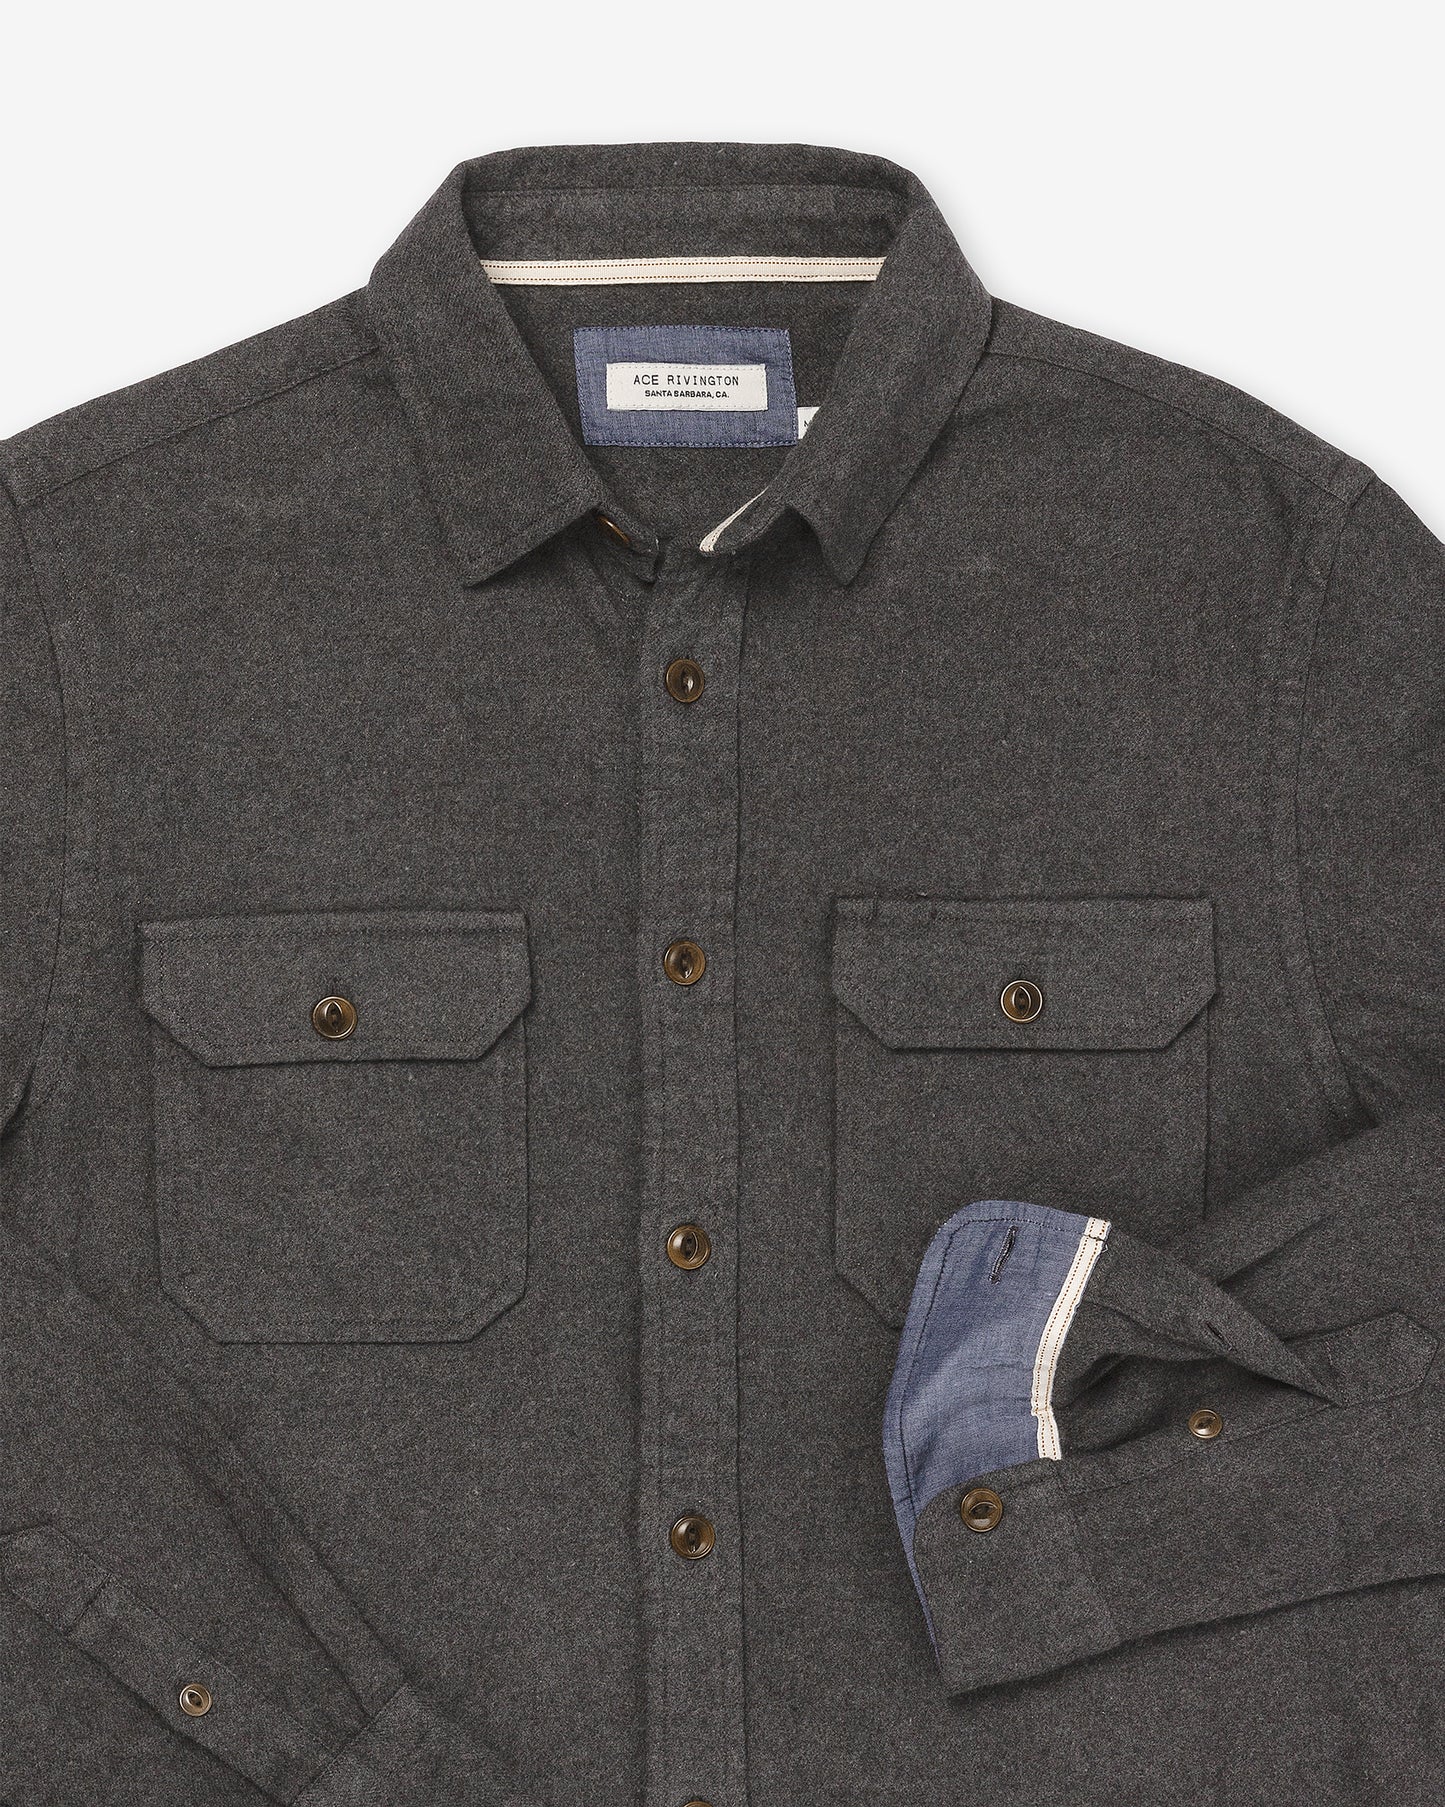 Flannel Shirt - Charcoal Heather